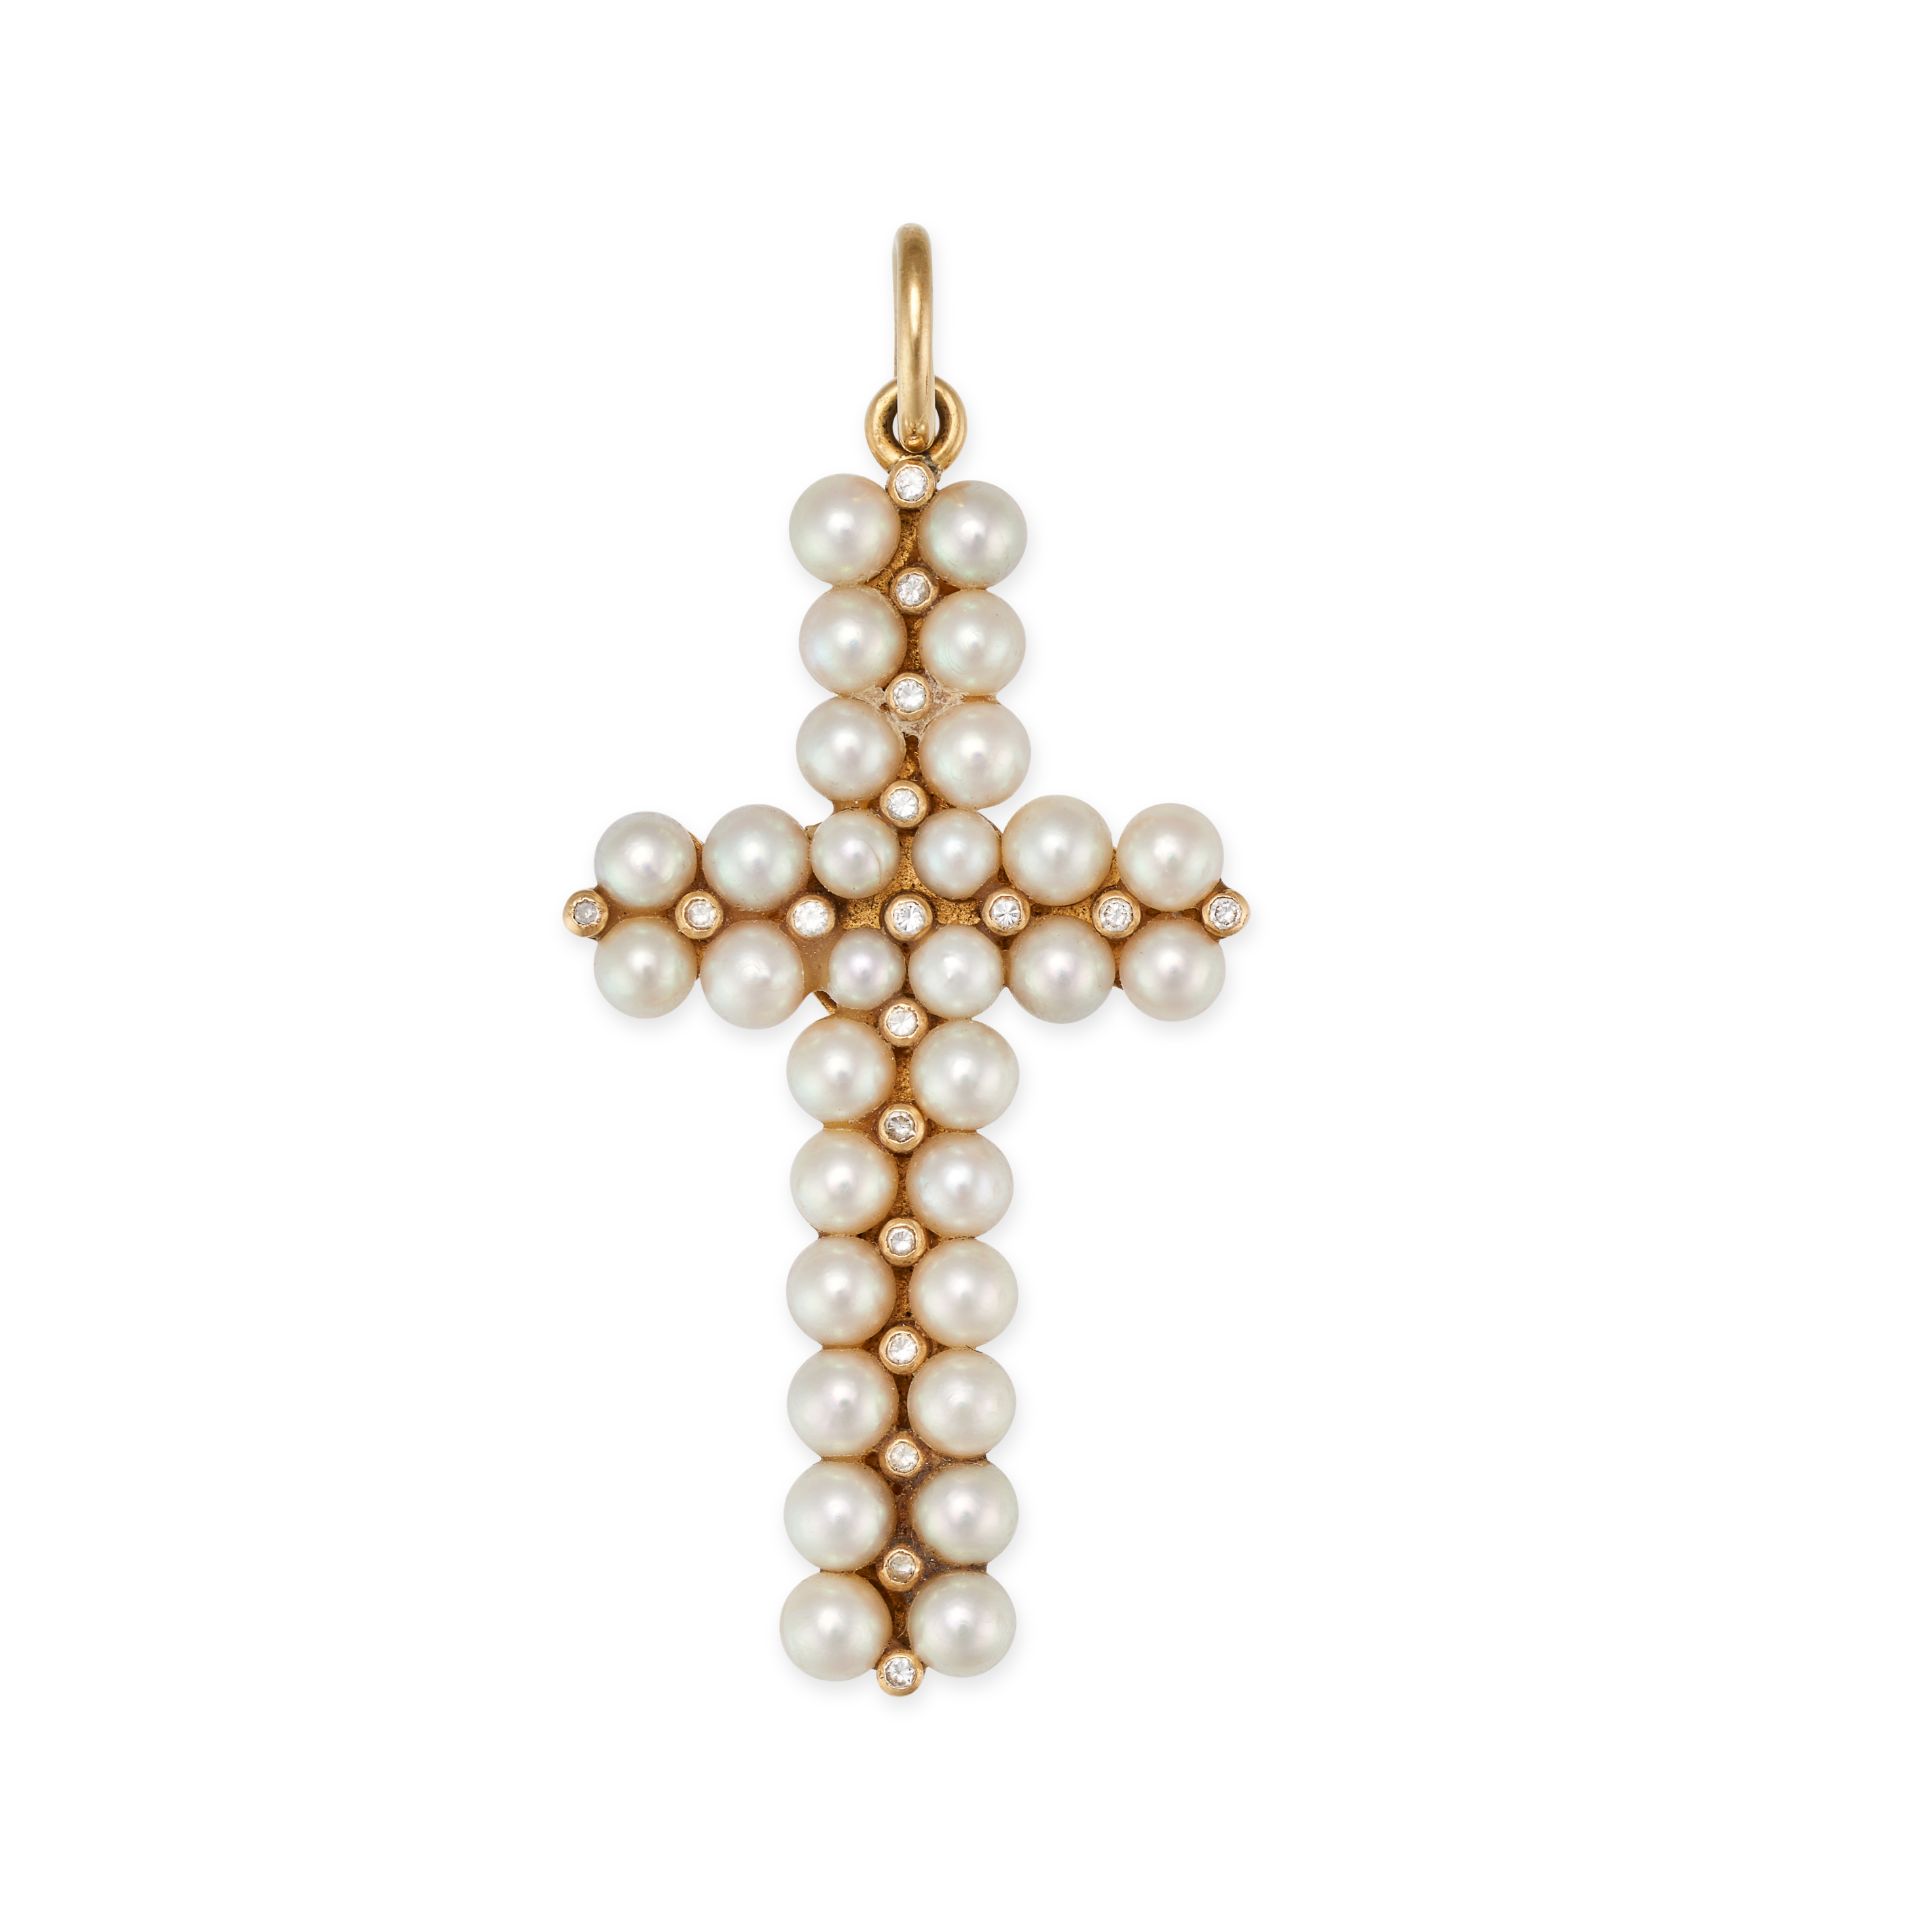 NO RESERVE - A PEARL AND DIAMOND CROSS PENDANT in yellow gold, designed as a cross set with pearl...